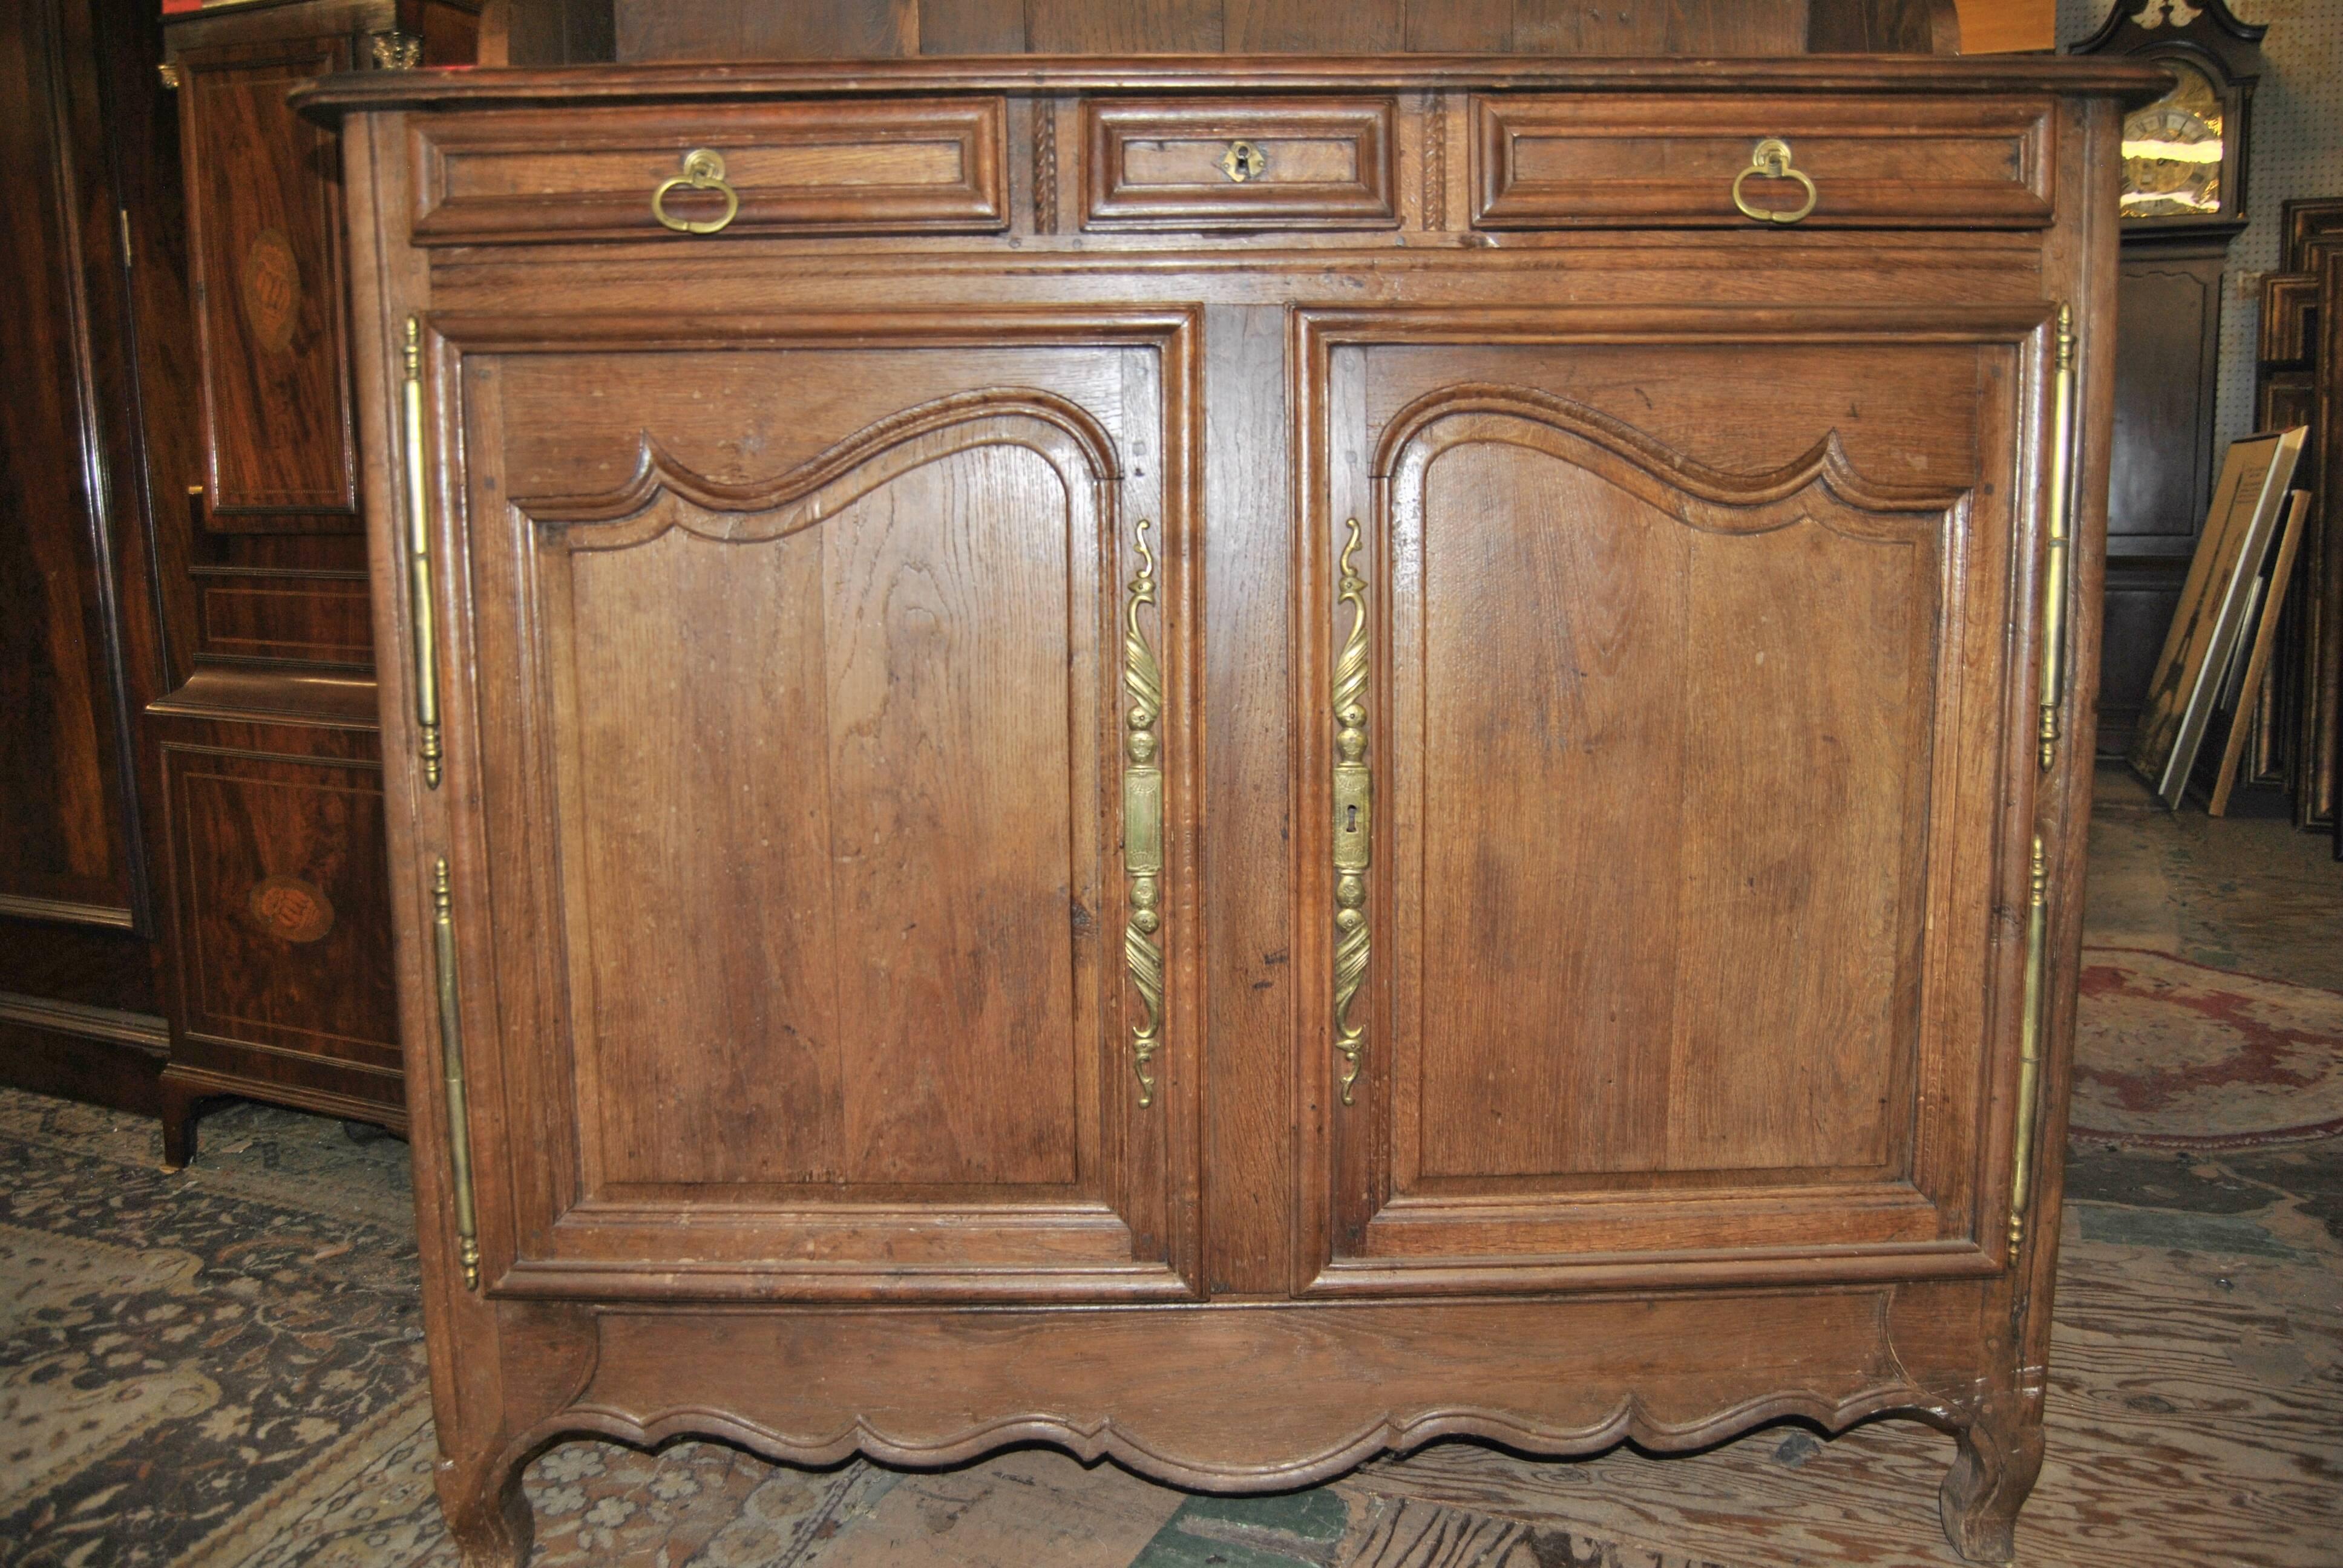 This is an oak country French cupboard, cabinet or plate rack made in France, circa 1850. It has a nicely shaped crown molding to the top. Beneath this there is a pair of shaped doors with brass panels. The panels have heraldic lions on either side